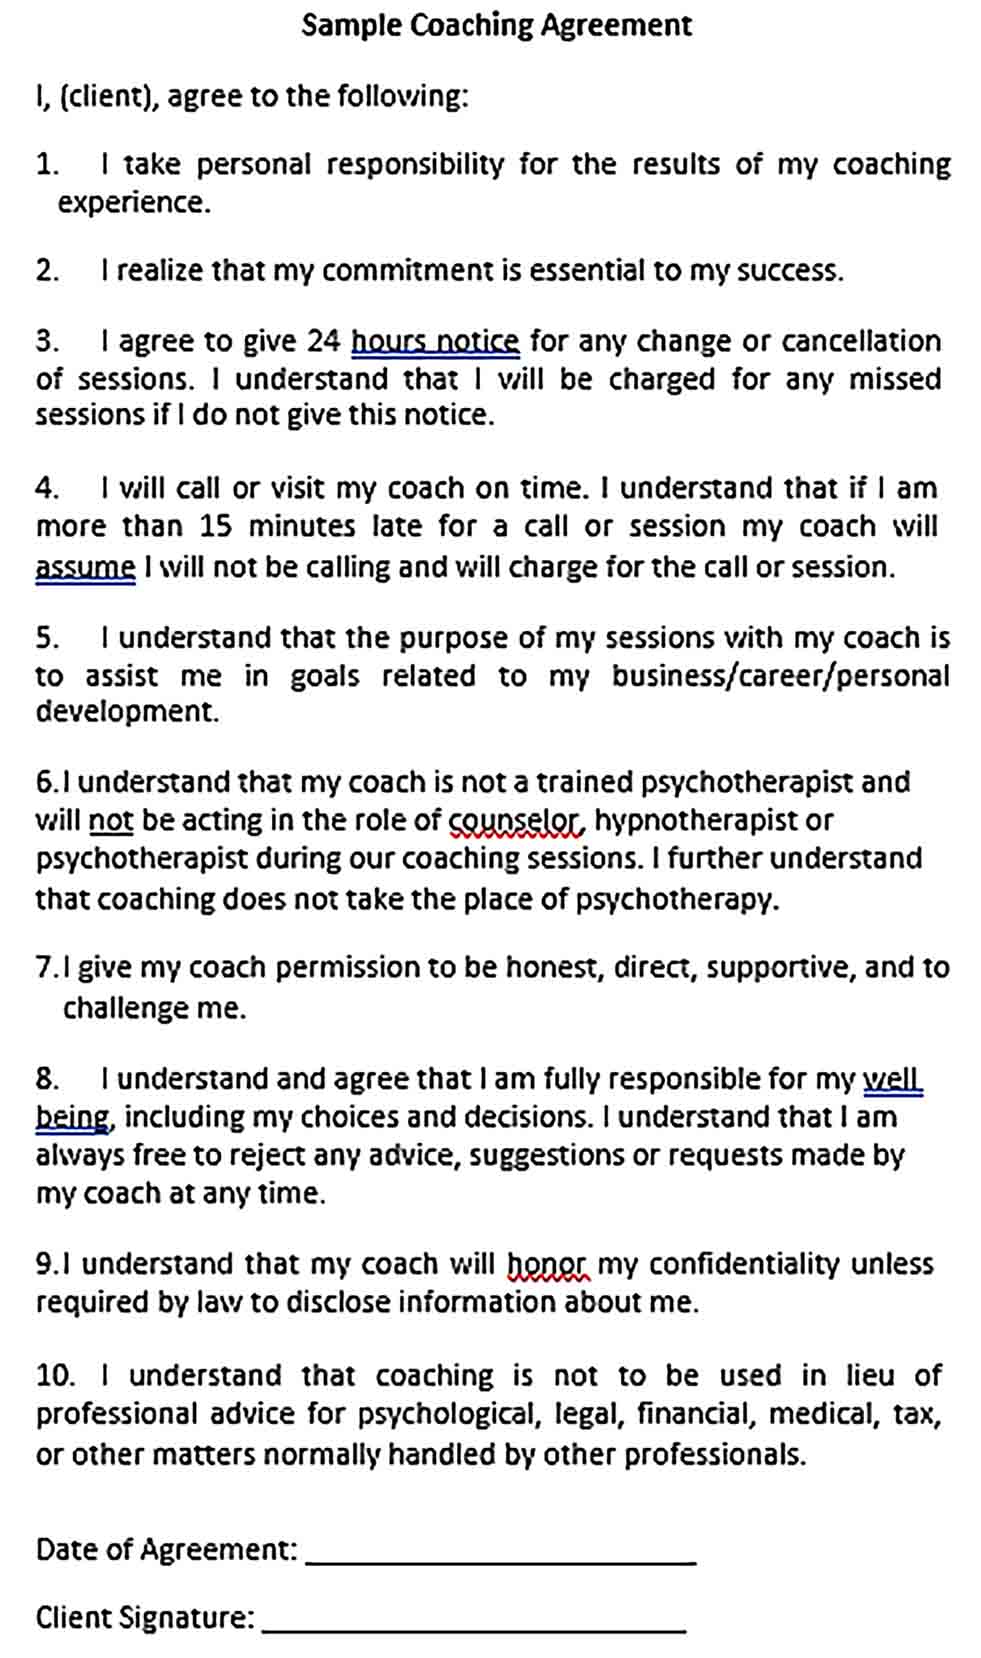 Sample Coaching Confidentiality Agreement